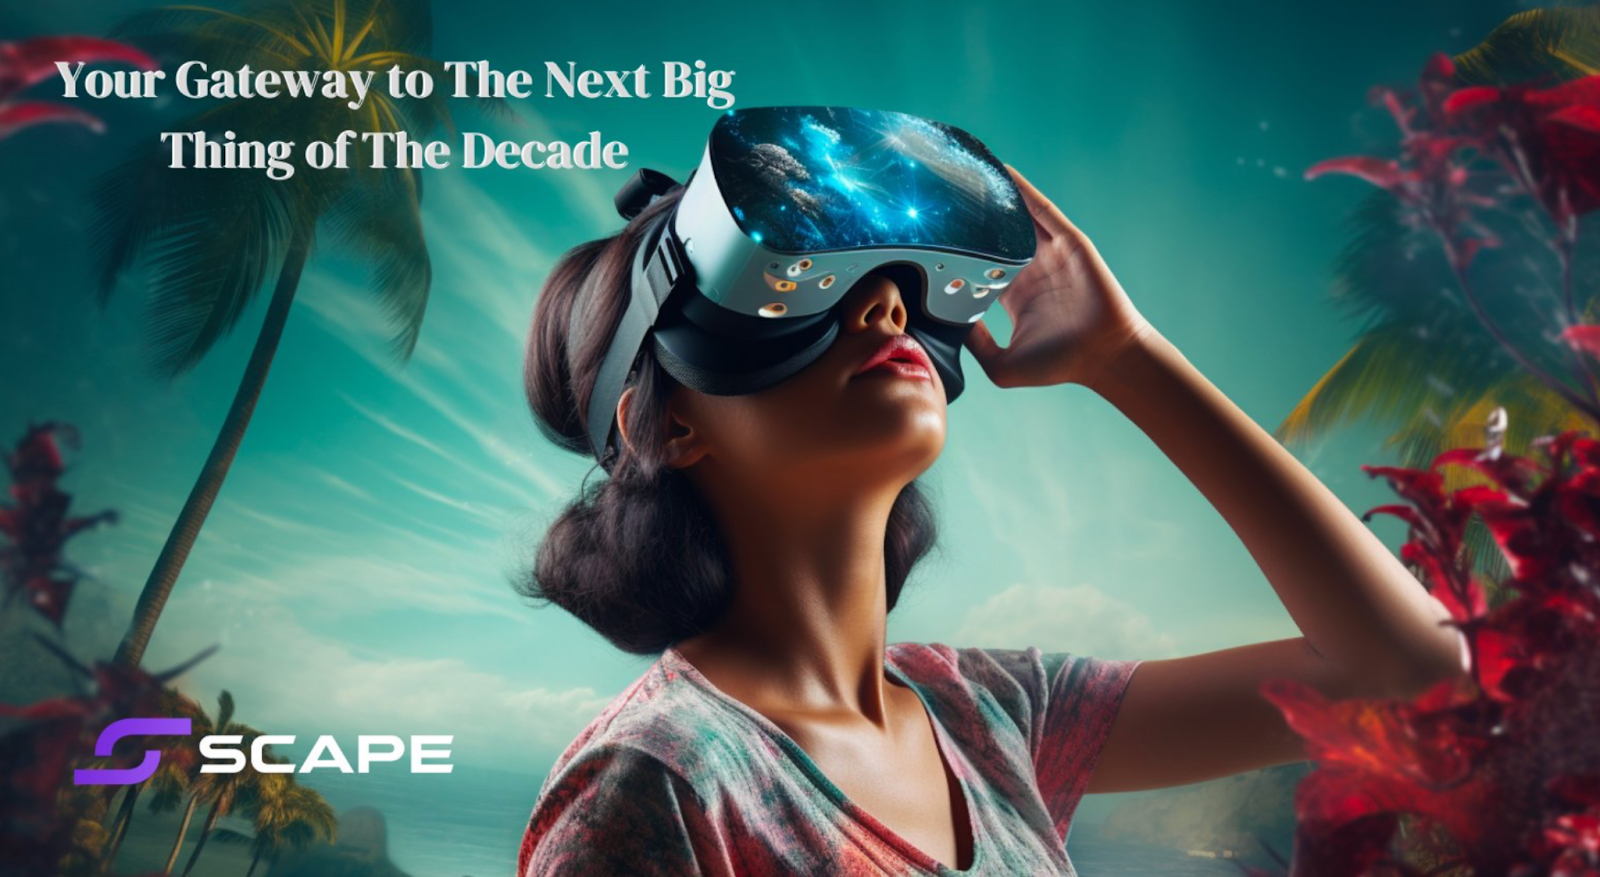 The Next Big Crypto Alert: Much-Awaited Virtual Reality Project 5th Scape Launches Presale 